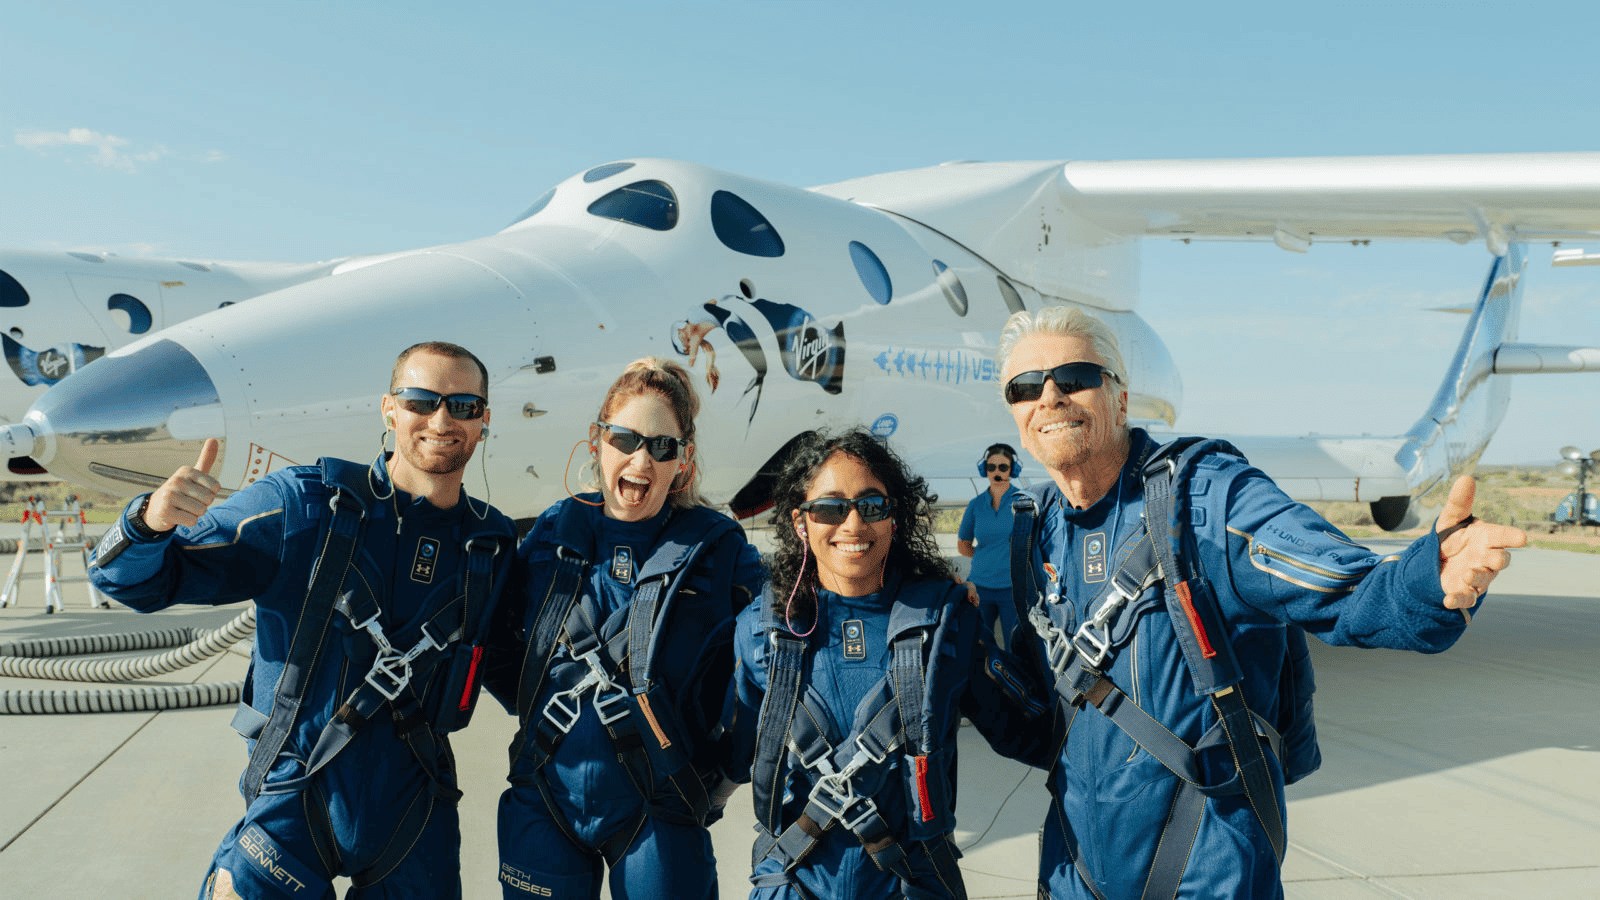 The first four space tourists after their suborbital flight on 11 July 2021 aboard the Space ShipTwo rocket-plane. From left to right: engineer Colin Bennett, instructor Beth Moses, company vice-president Sirisha Bandla, Richard Branson founder of Virgin Galactic Credit: Virgin Galactic